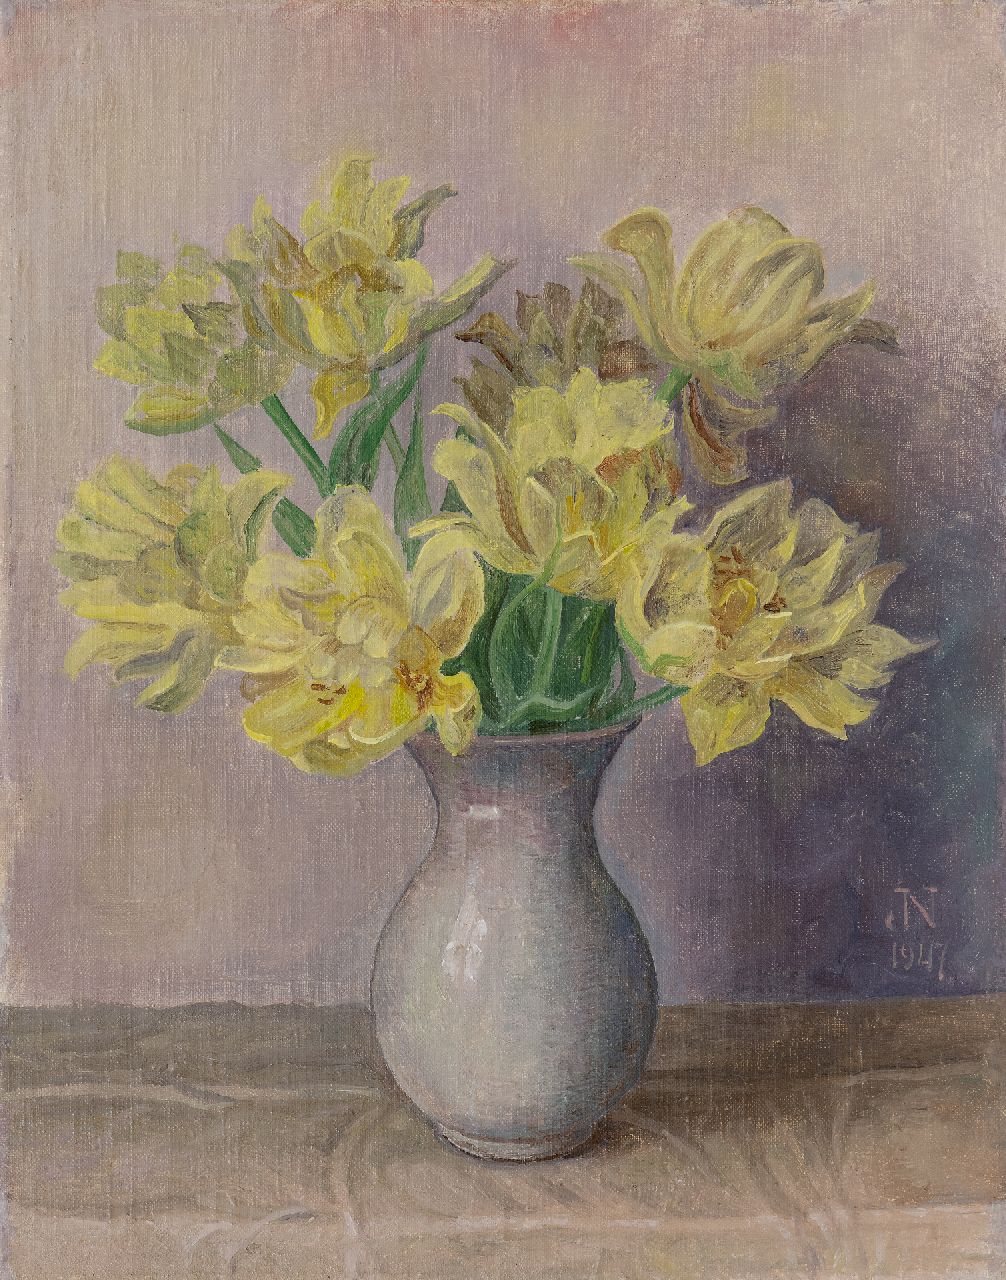 Nieweg J.  | Jakob Nieweg | Paintings offered for sale | Yellow tulips, oil on canvas 45.2 x 35.4 cm, signed l.r. with monogram and dated 1947